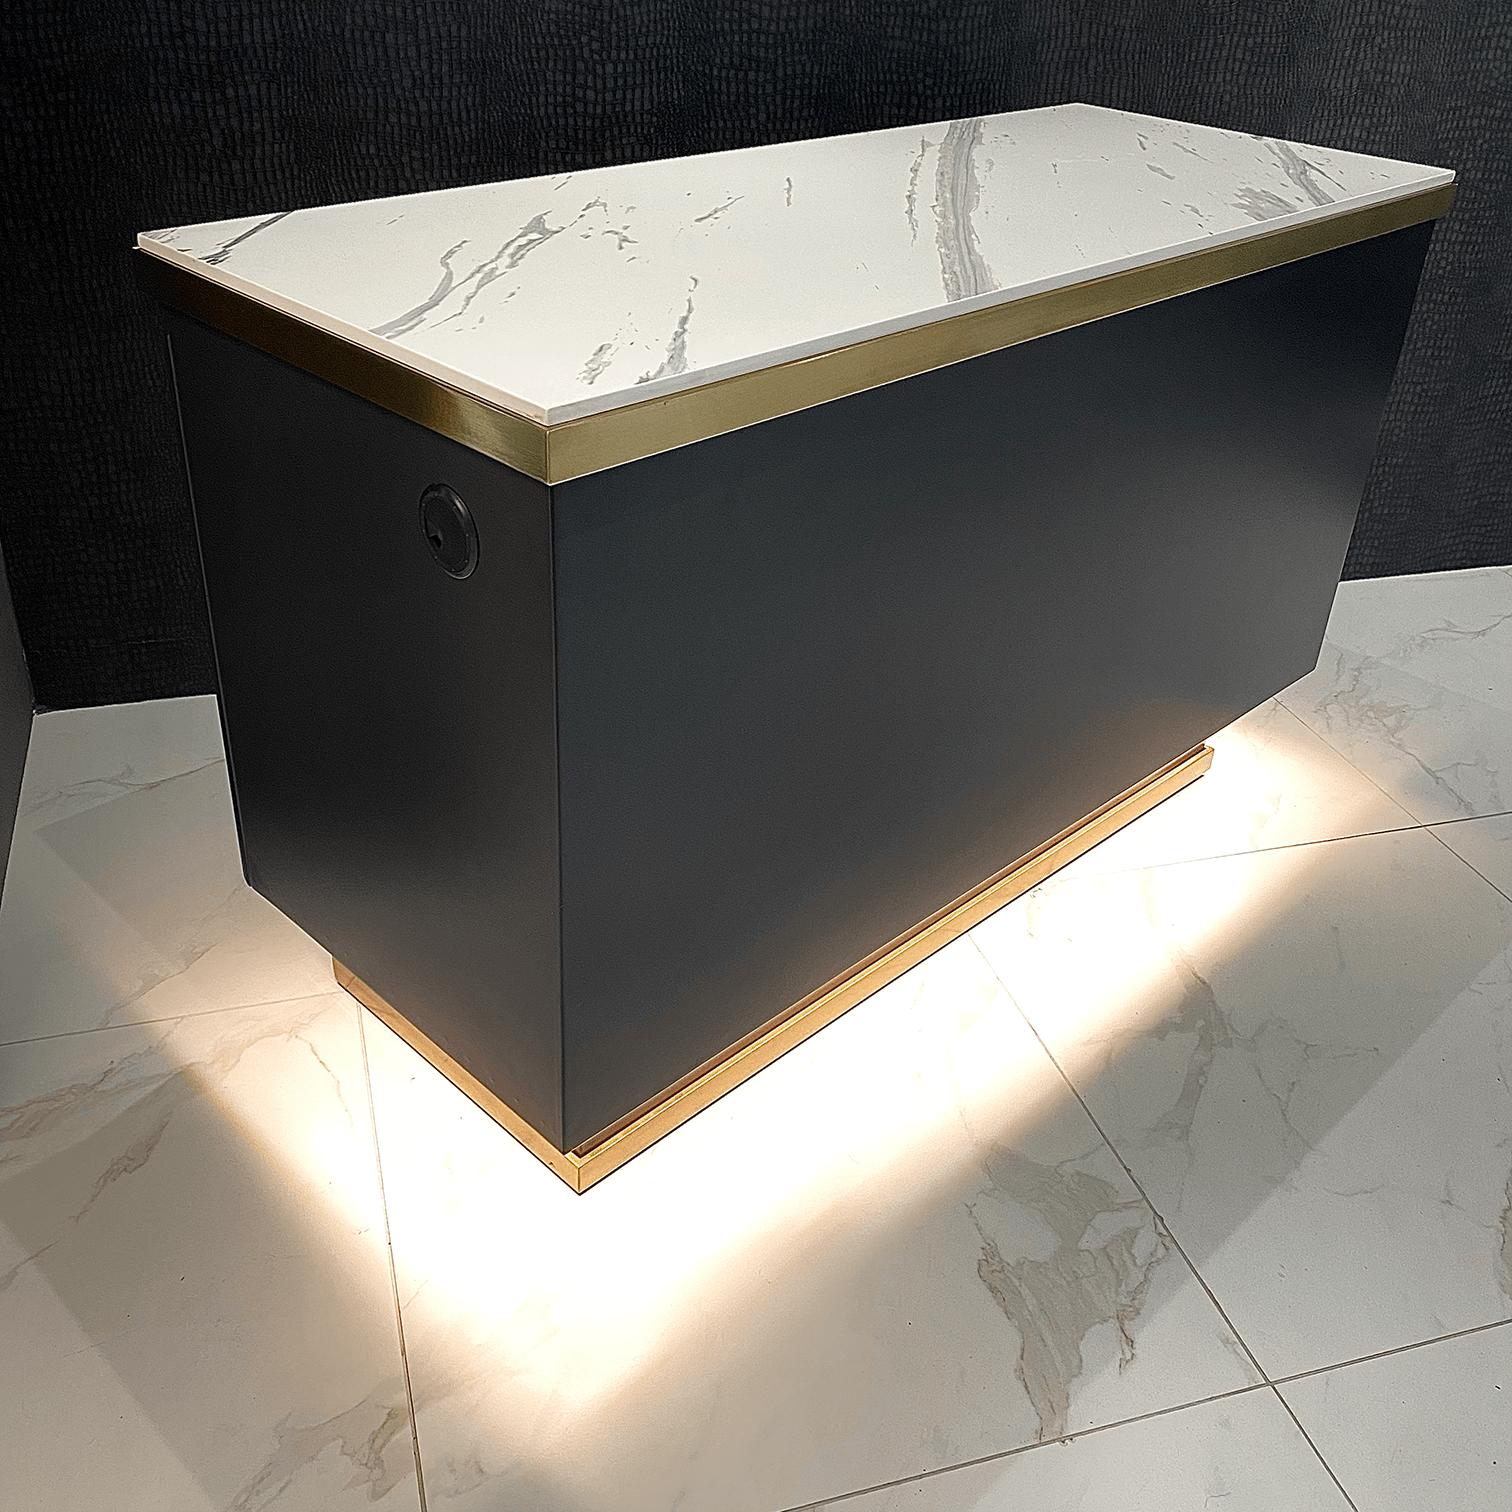 The Matrix Desk - Charcoal Black & Gold with White Patterned Stone Top by SEC